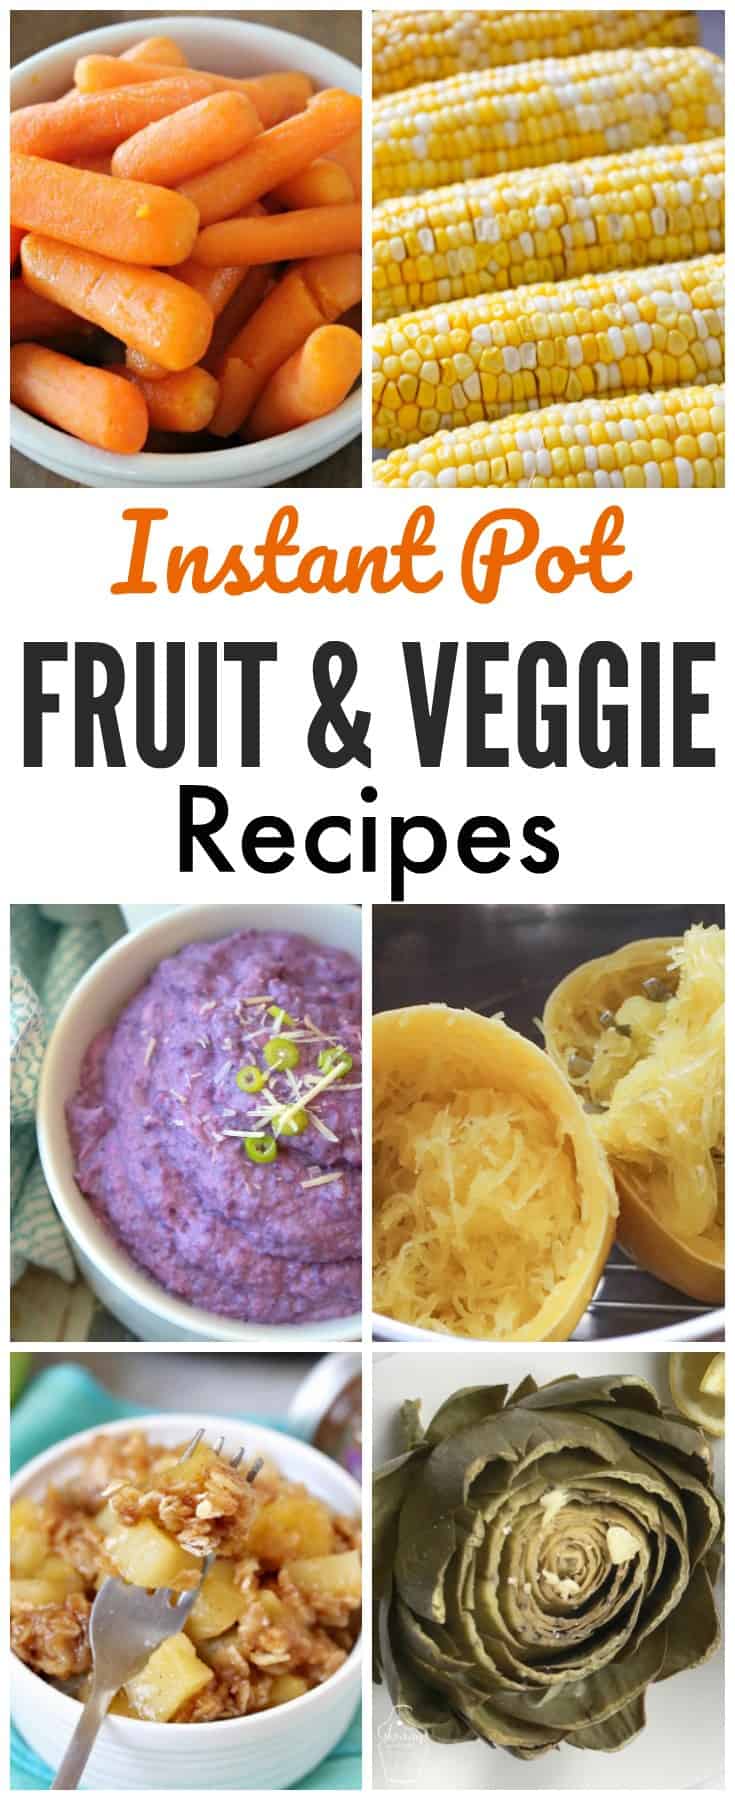 Looking for some easy side dishes and desserts? Try one of these delicious Instant Pot fruit and veggie recipes. They're all fast AND easy! #instantpot #pressurecooker #sidedishes #dessert via @wondermomwannab